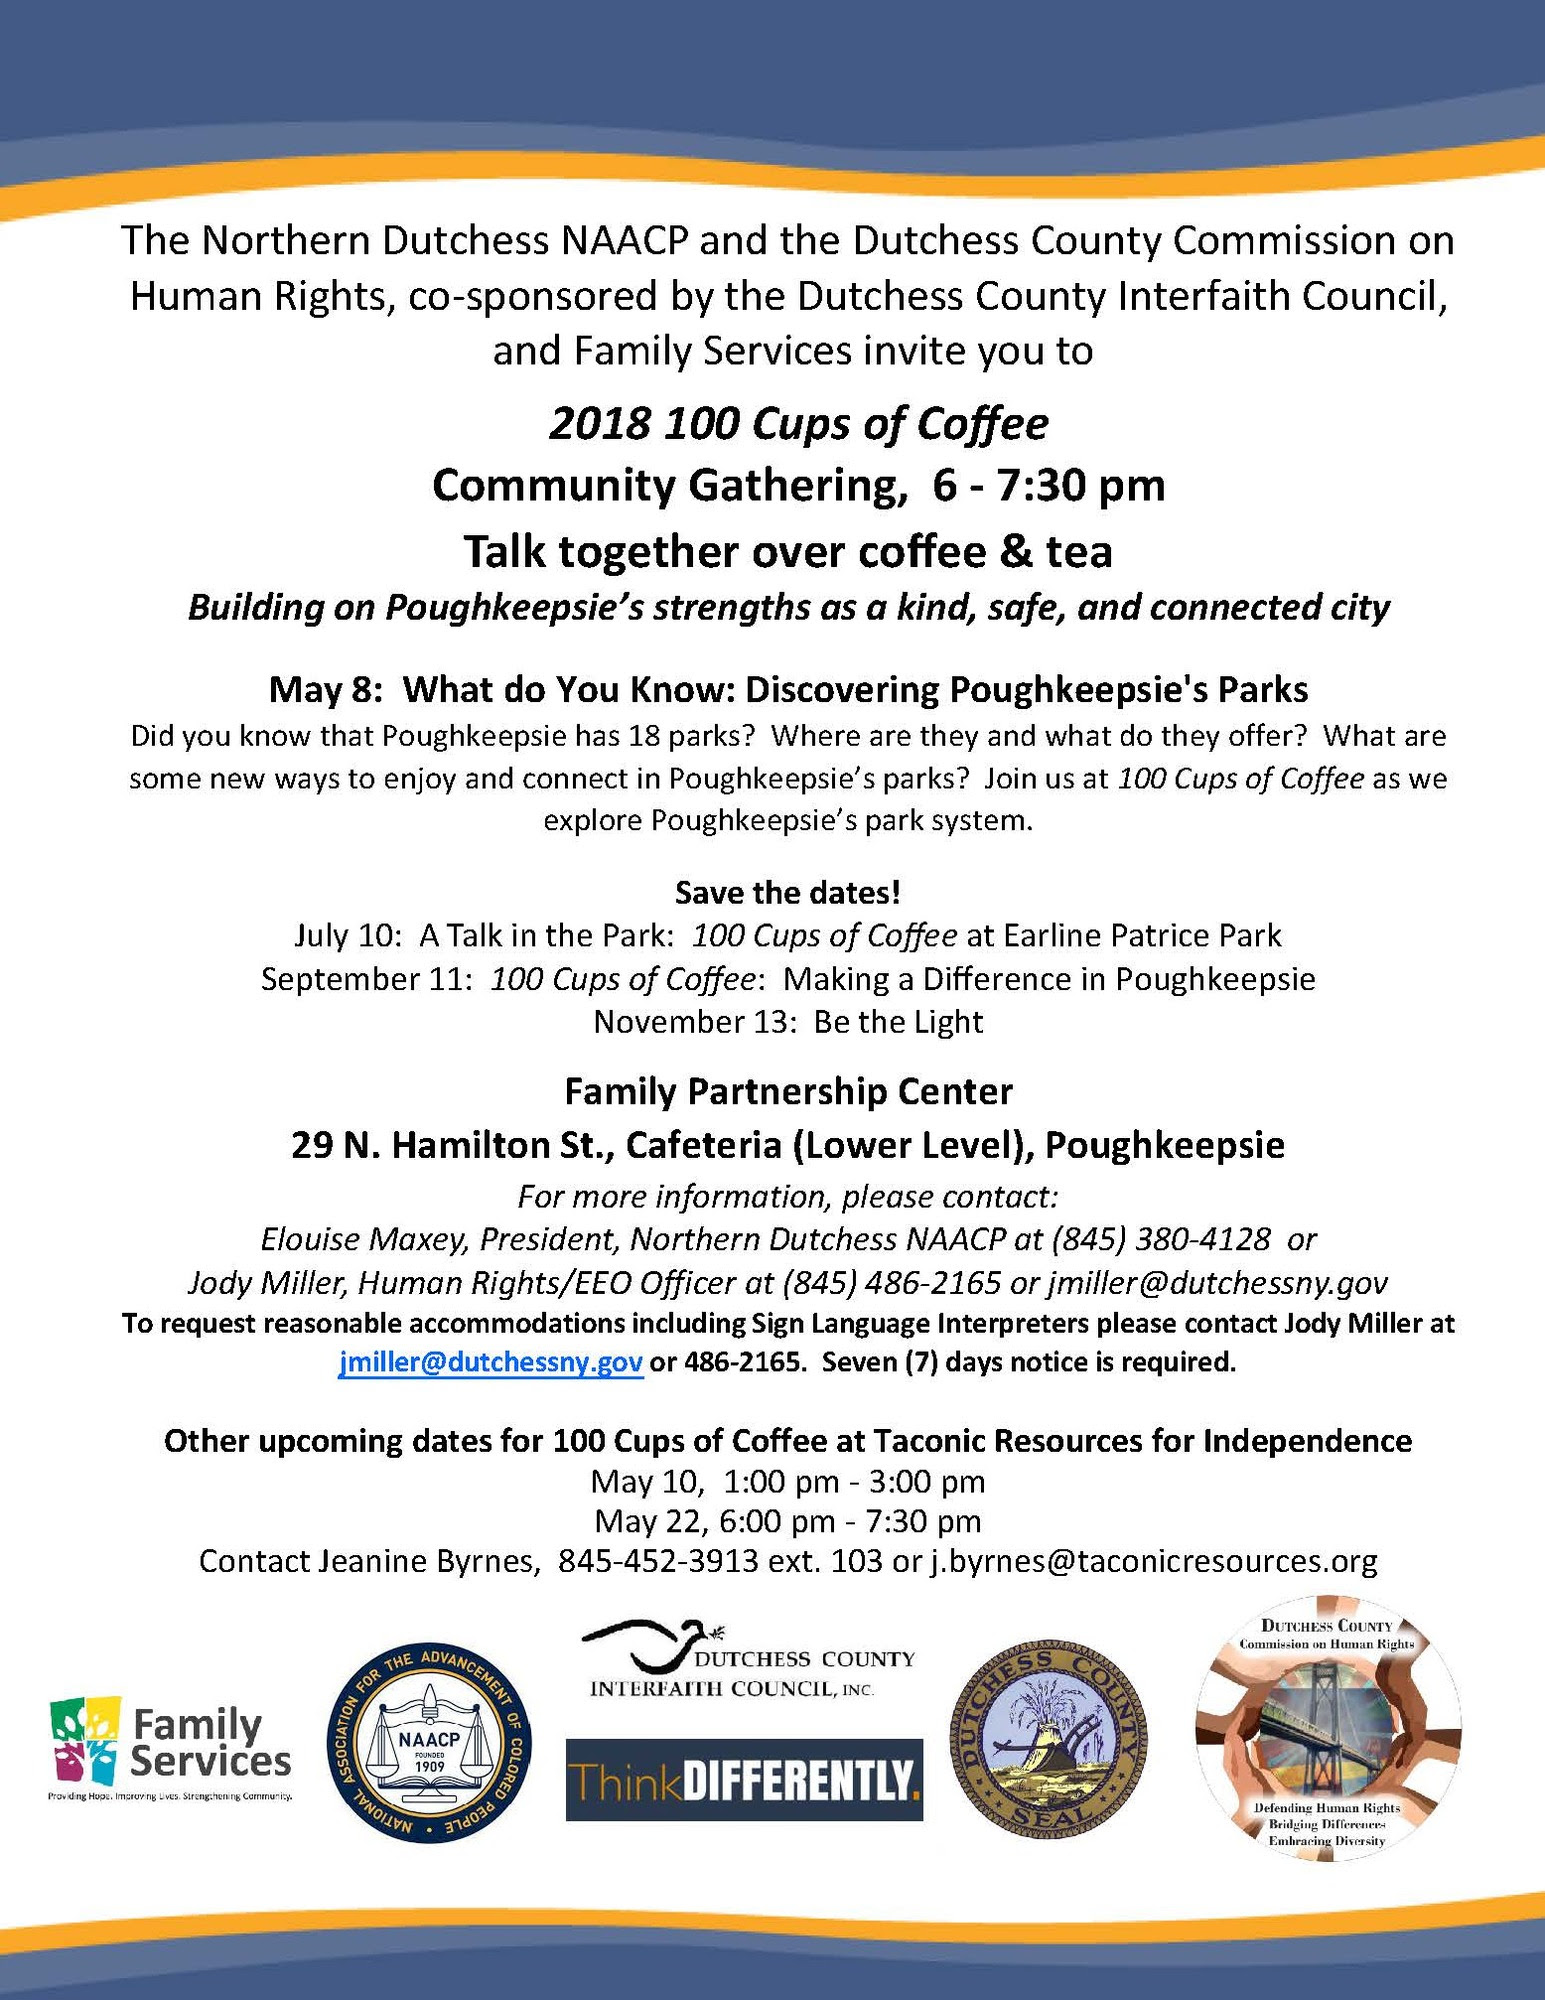 Join the Dutchess County Commission on Human Rights on Tuesday at the Family Partnership for the next event in the 100 Cups of Coffee series.